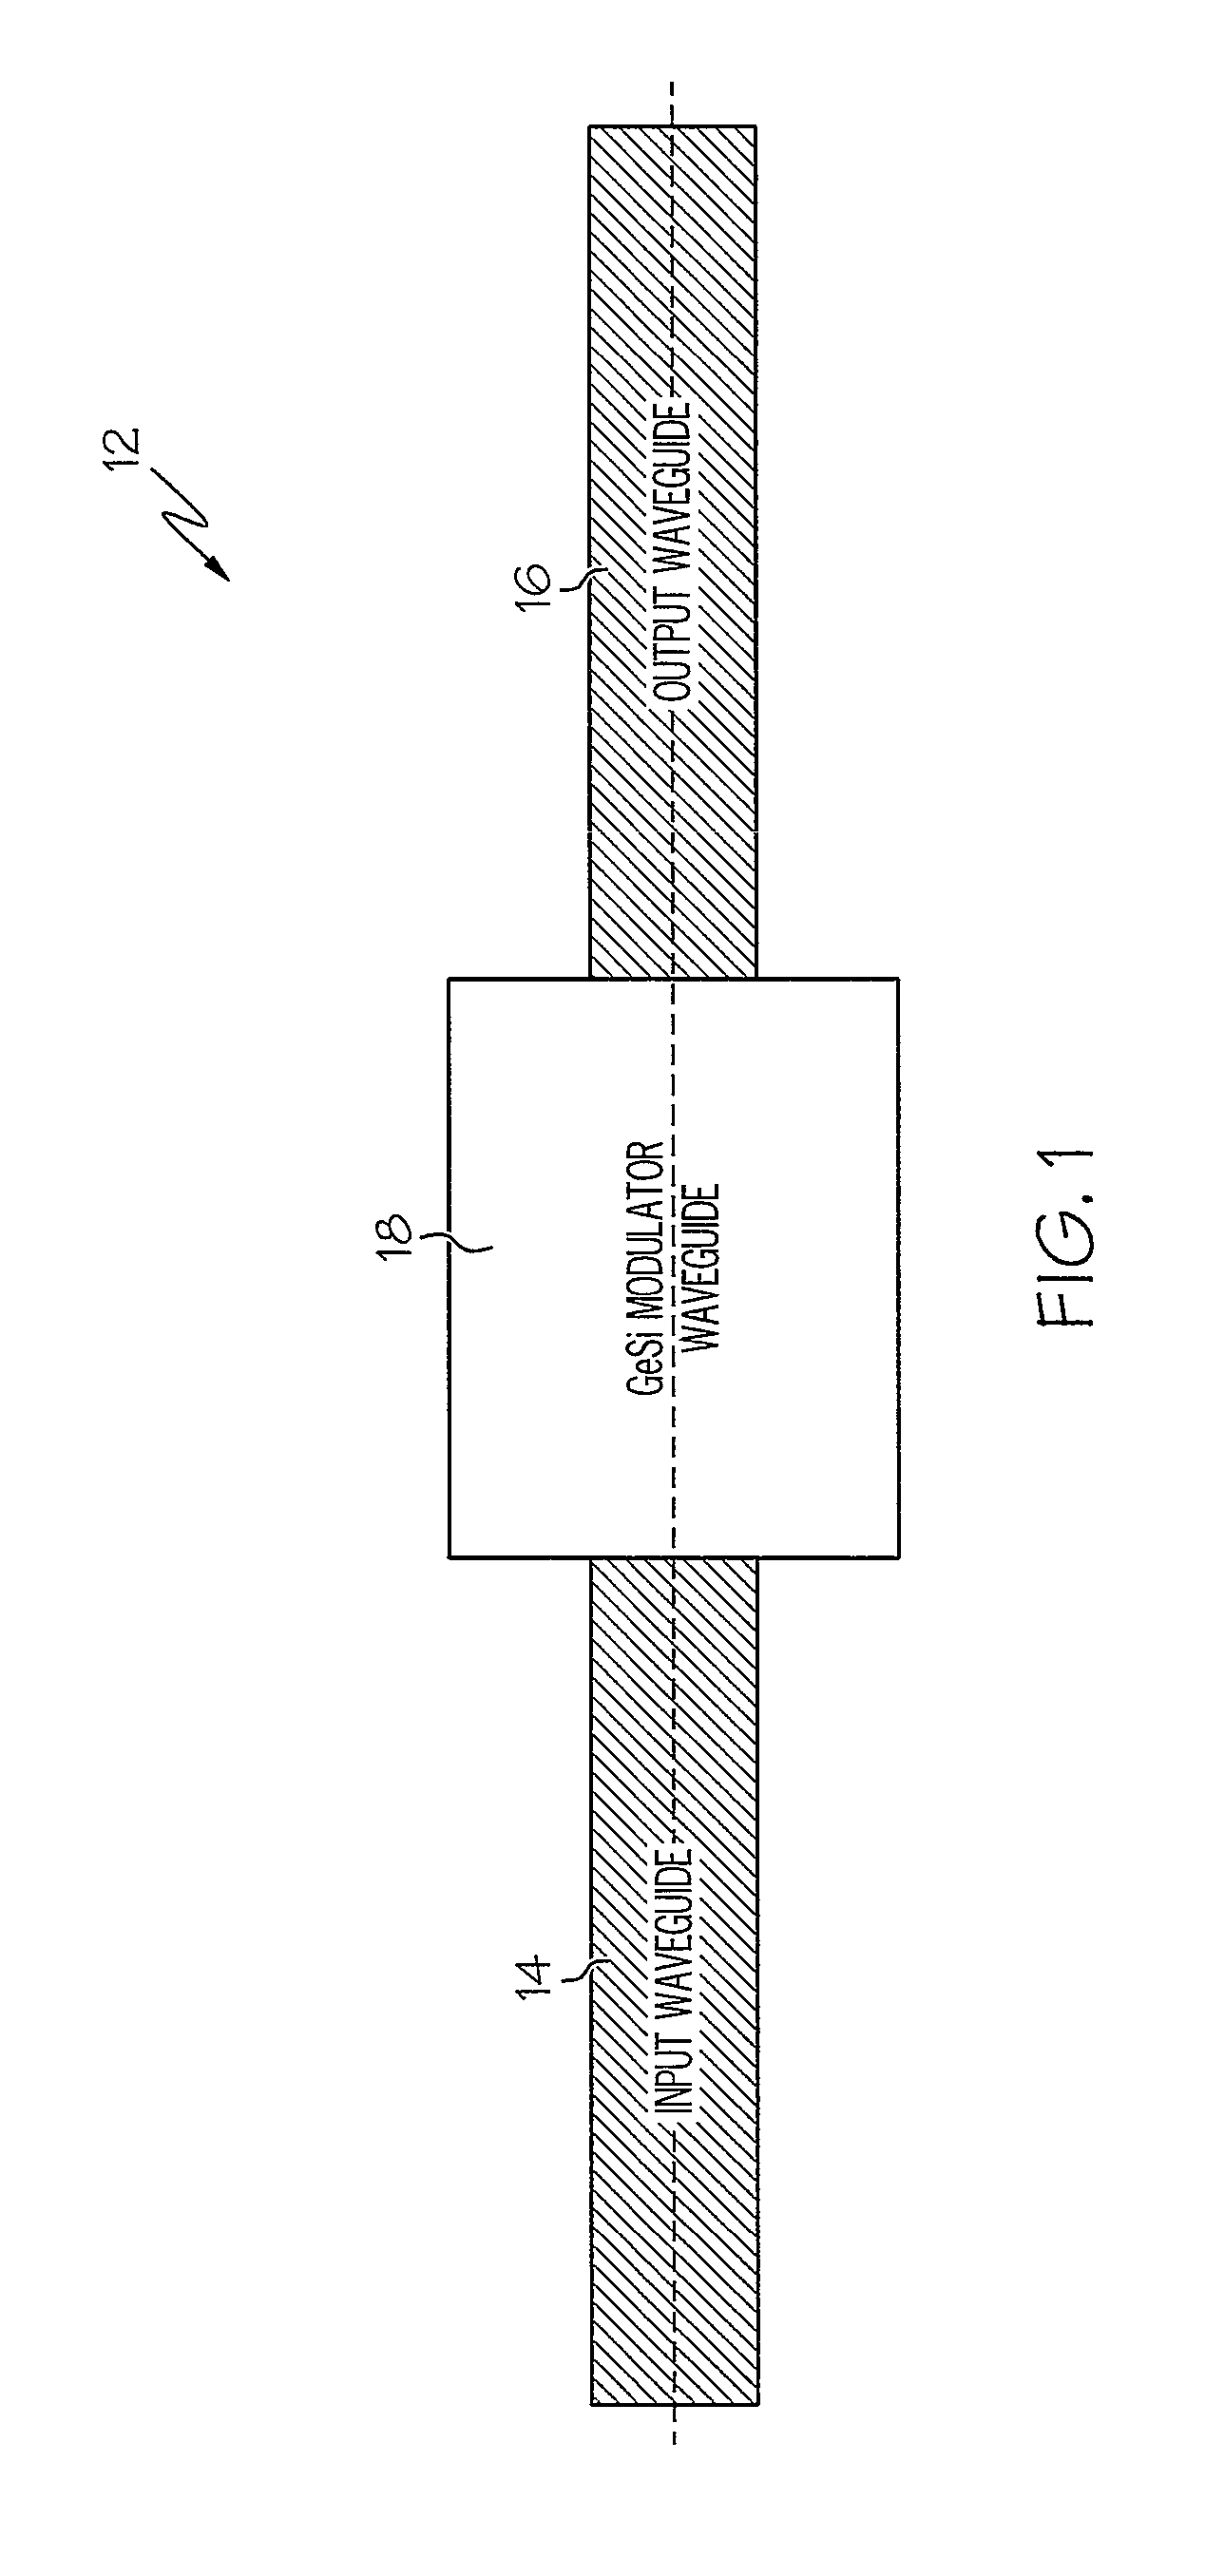 Method for fabricating butt-coupled electro-absorptive modulators